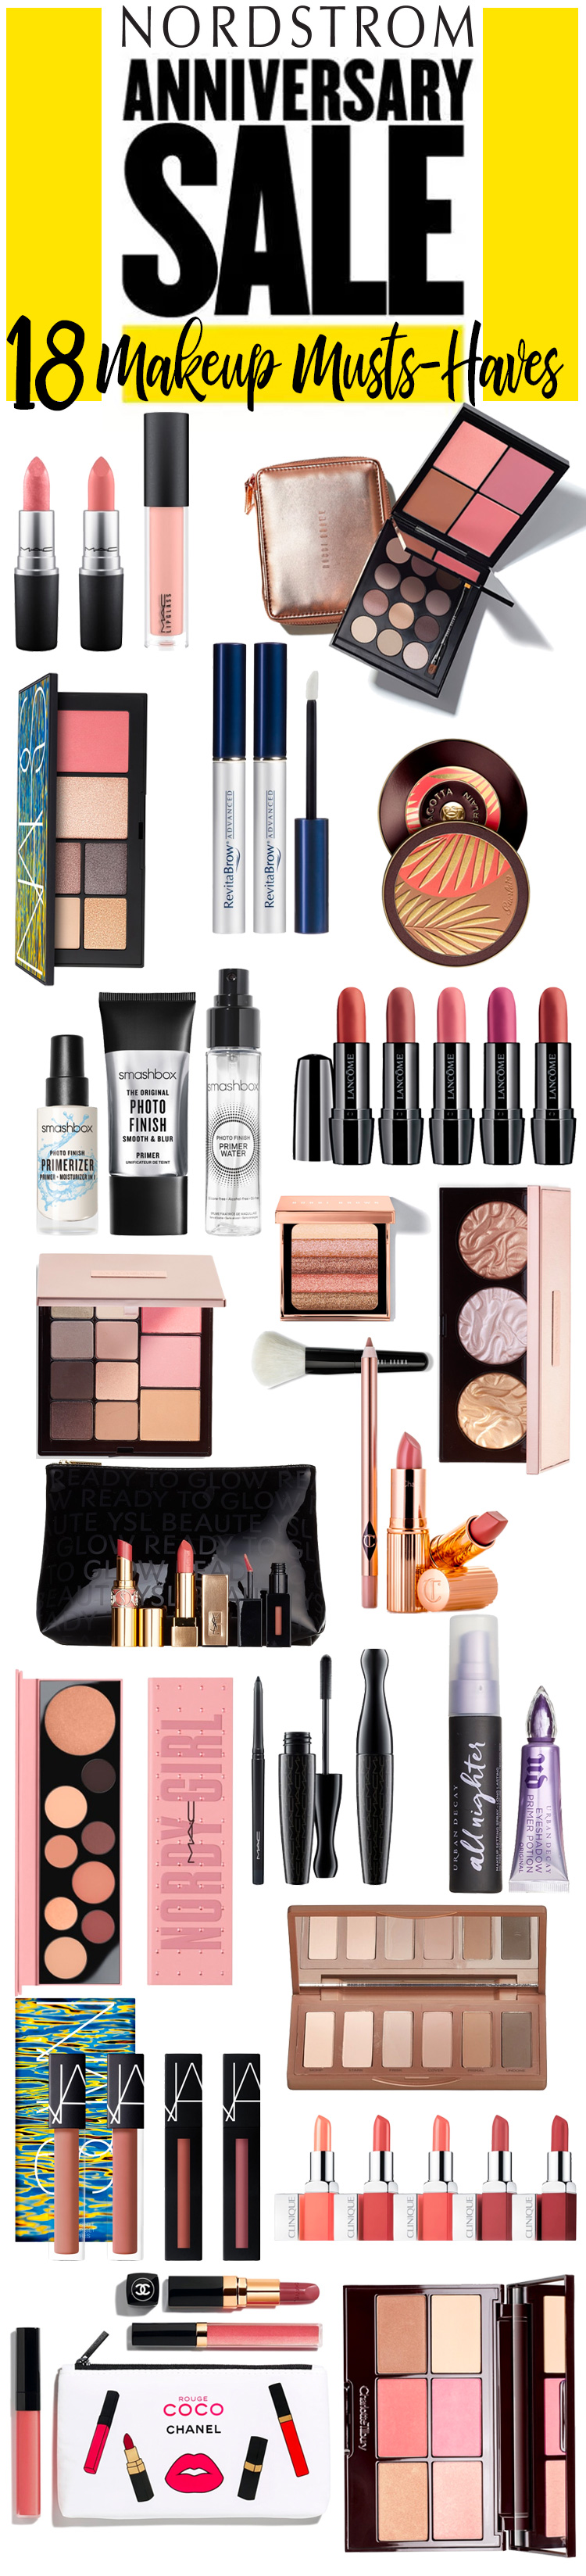 Nordstrom Anniversary Sale 2018: 18 Makeup Must-Haves — Beautiful Makeup  Search